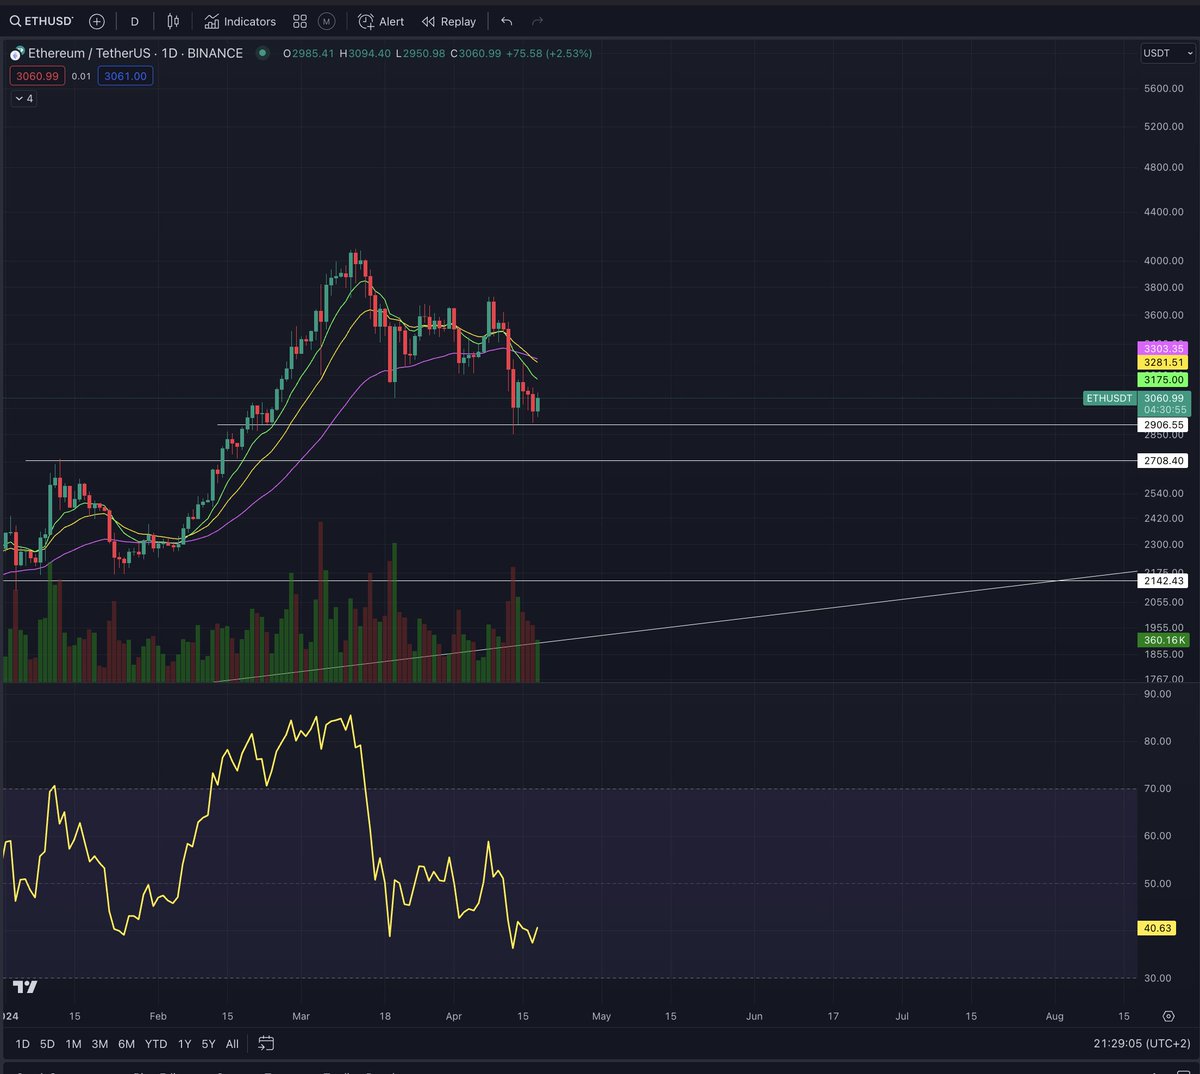 if u think this pullback in the market is bearish u are clueless imo what's happening is so bullish and i see a lot of ppl calling for much lower prices now u guys are gonna be sidelined and buy in way higher trust ur sitting here saying 'bitcoin to $52k' u dumbo thats